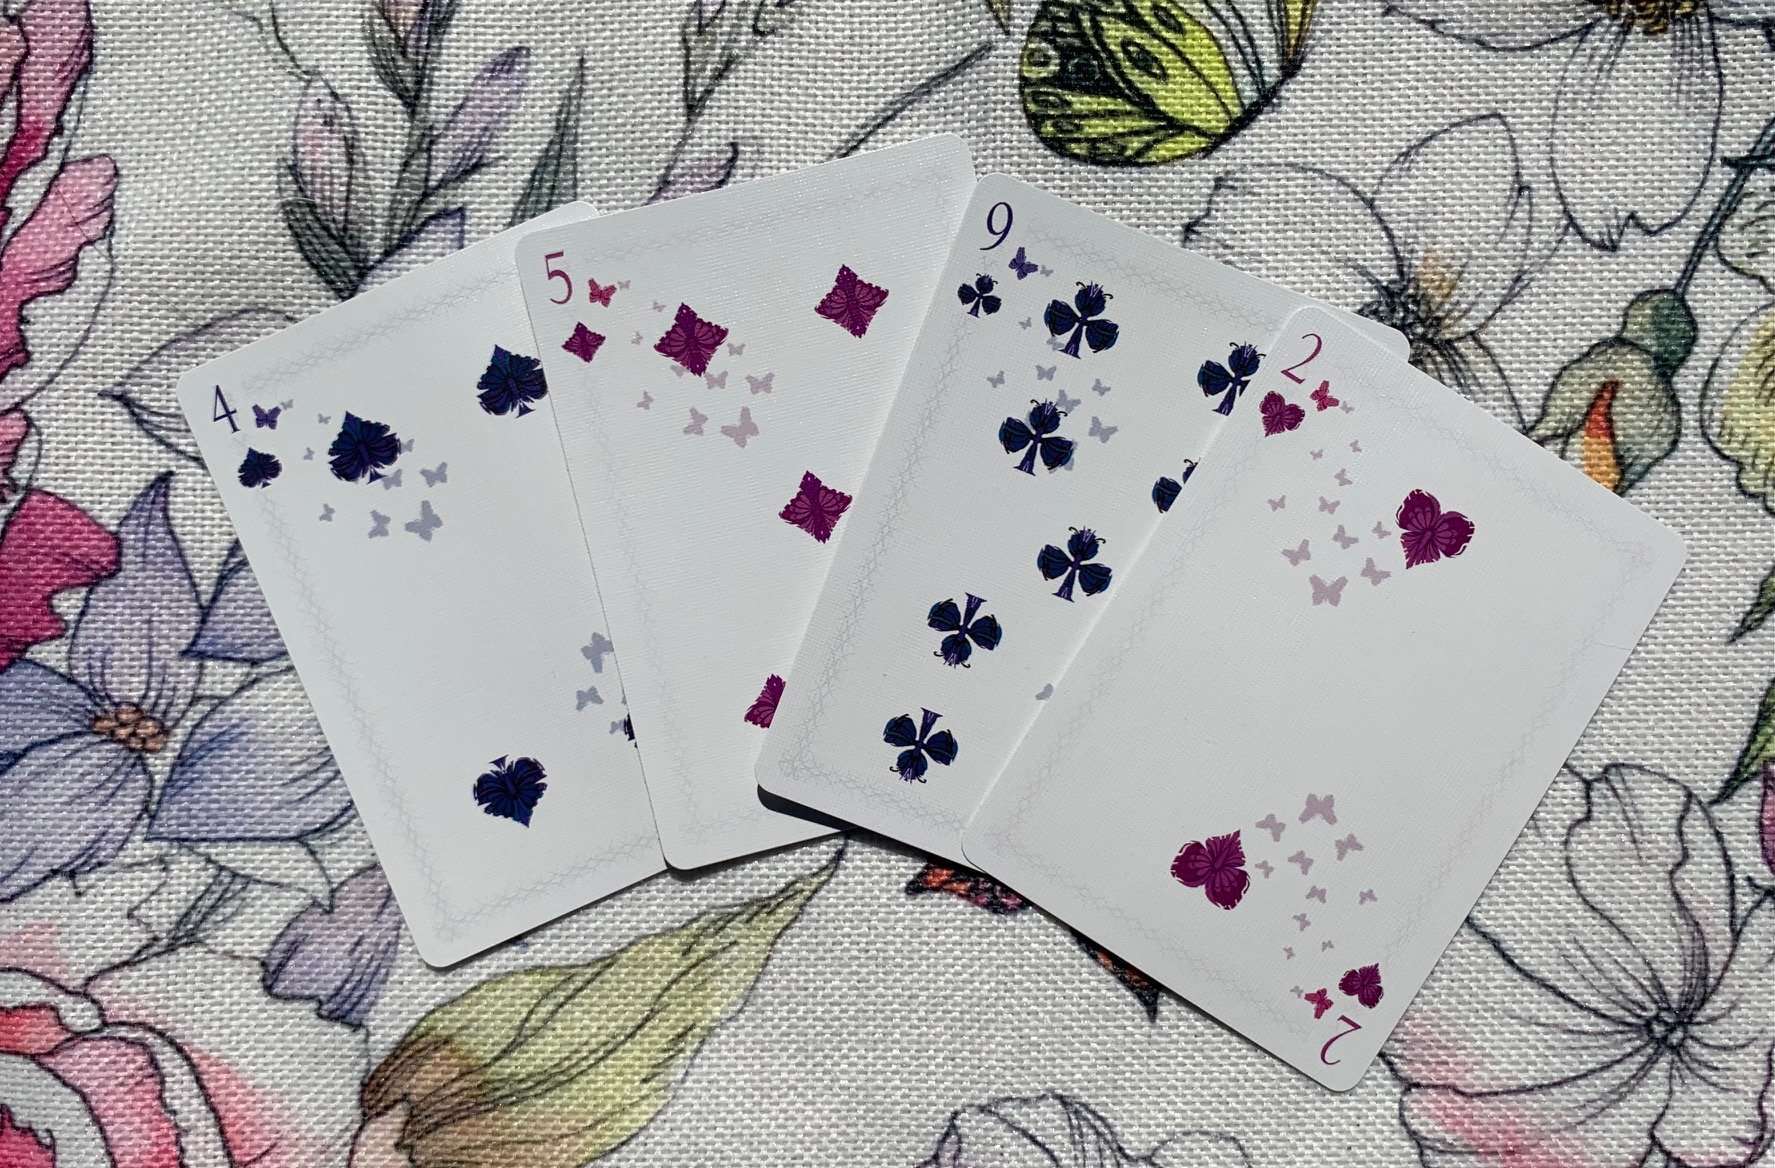 Bicycle Double Blank Playing Cards - Butterfly Magic Store